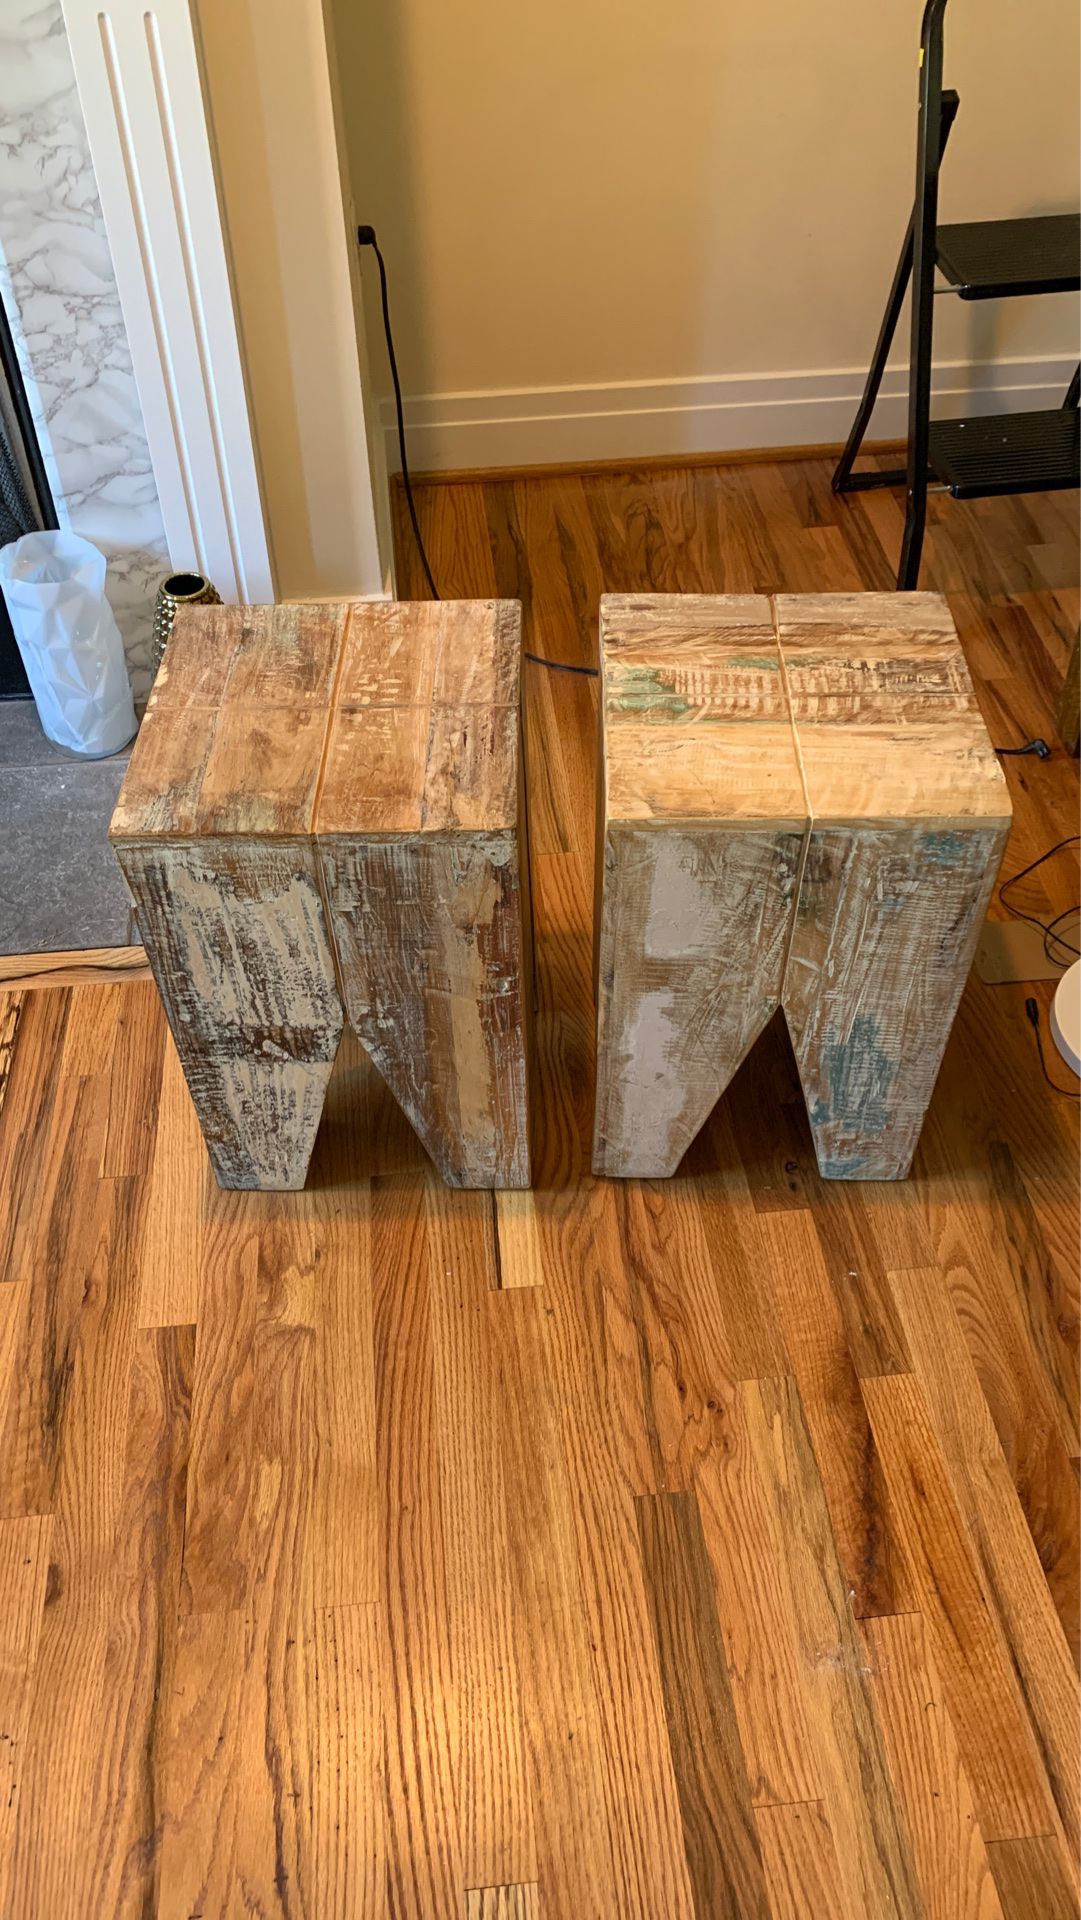 Eleanor end tables